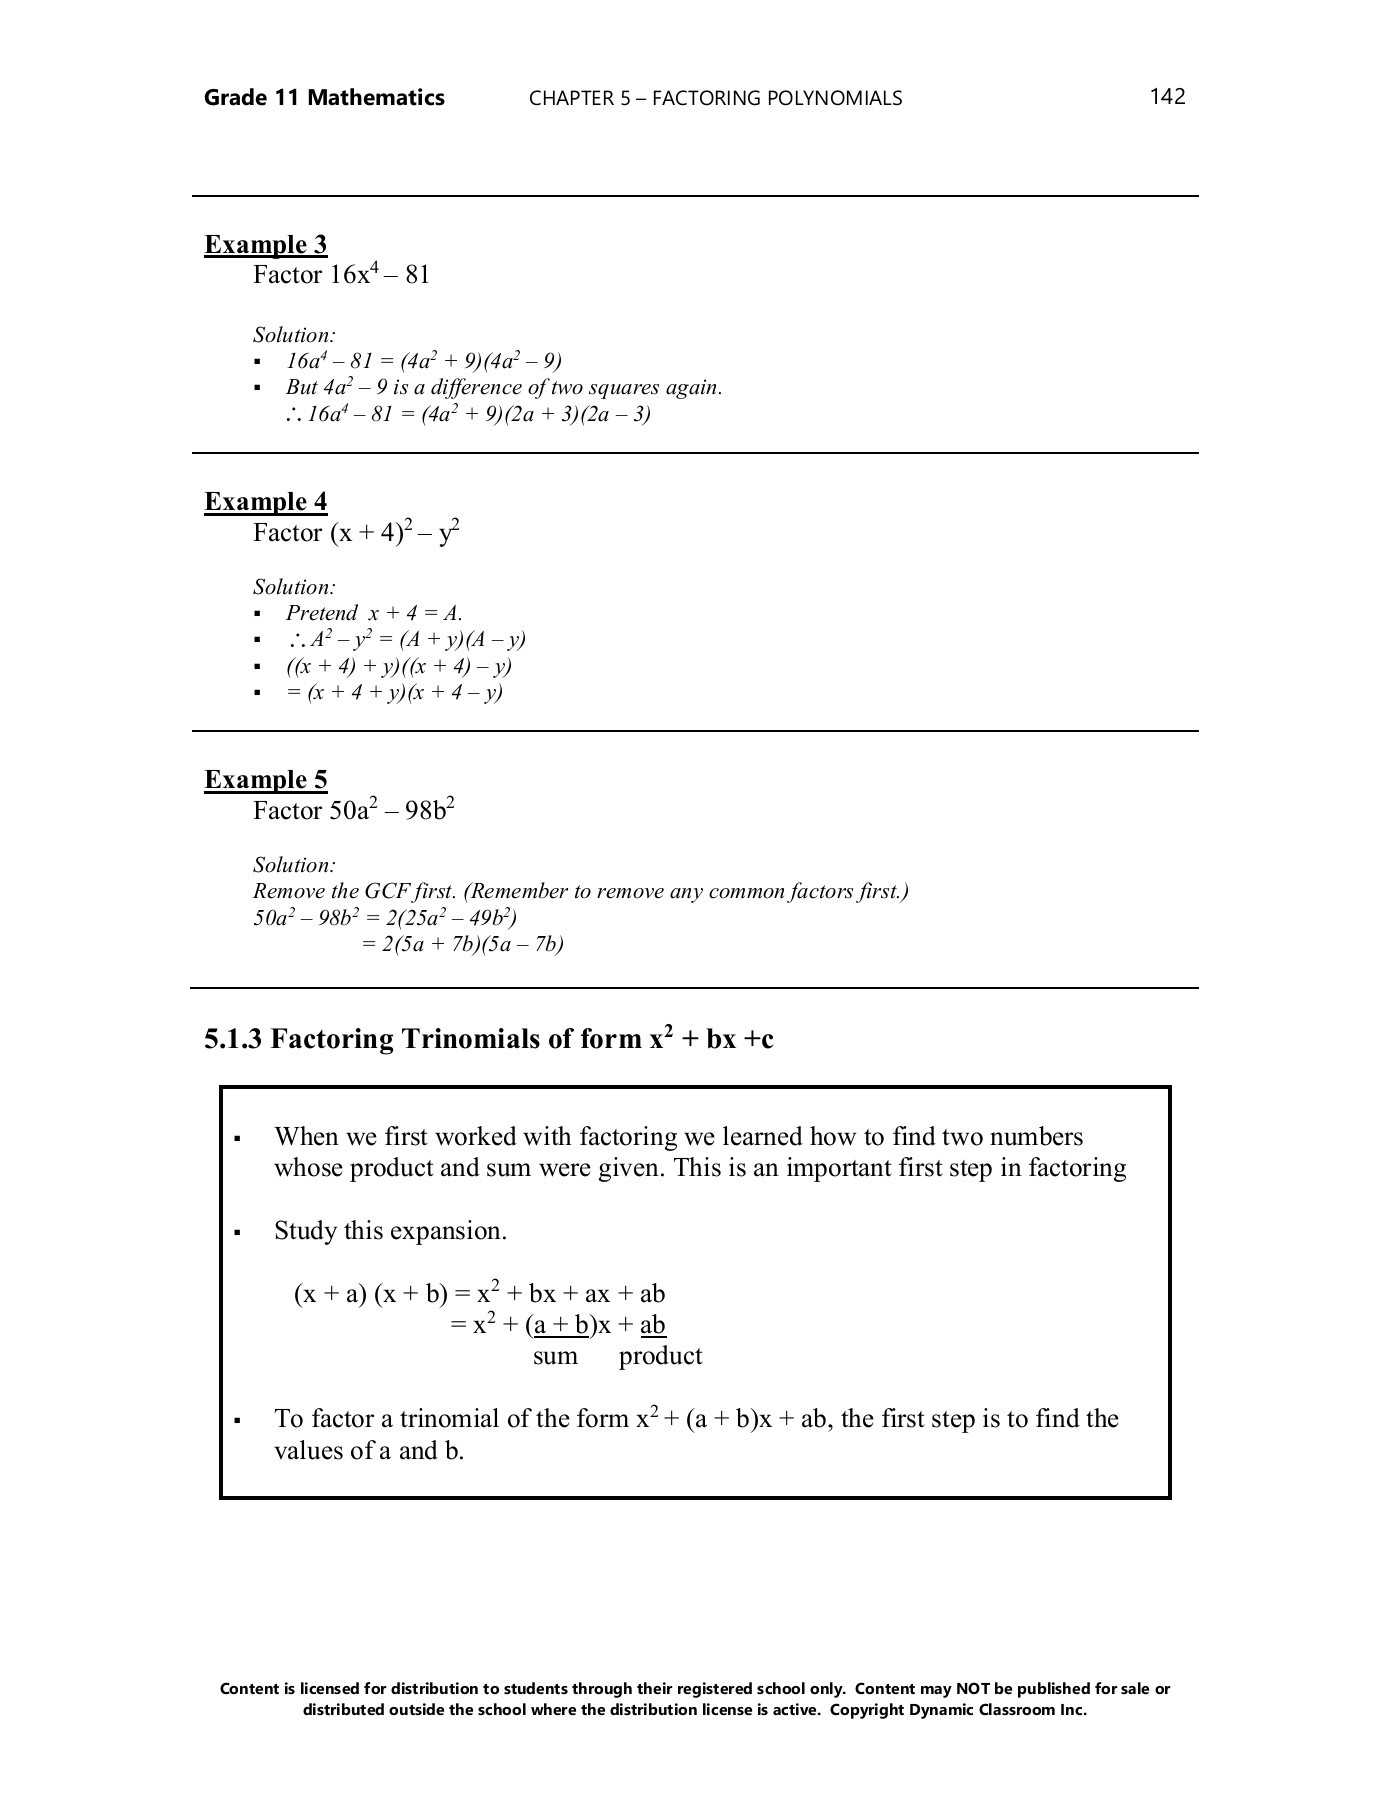 Factoring Perfect Square Trinomials Worksheet Also Grade 11 Wp Teacher Full Digital Guide Pages 151 200 Text